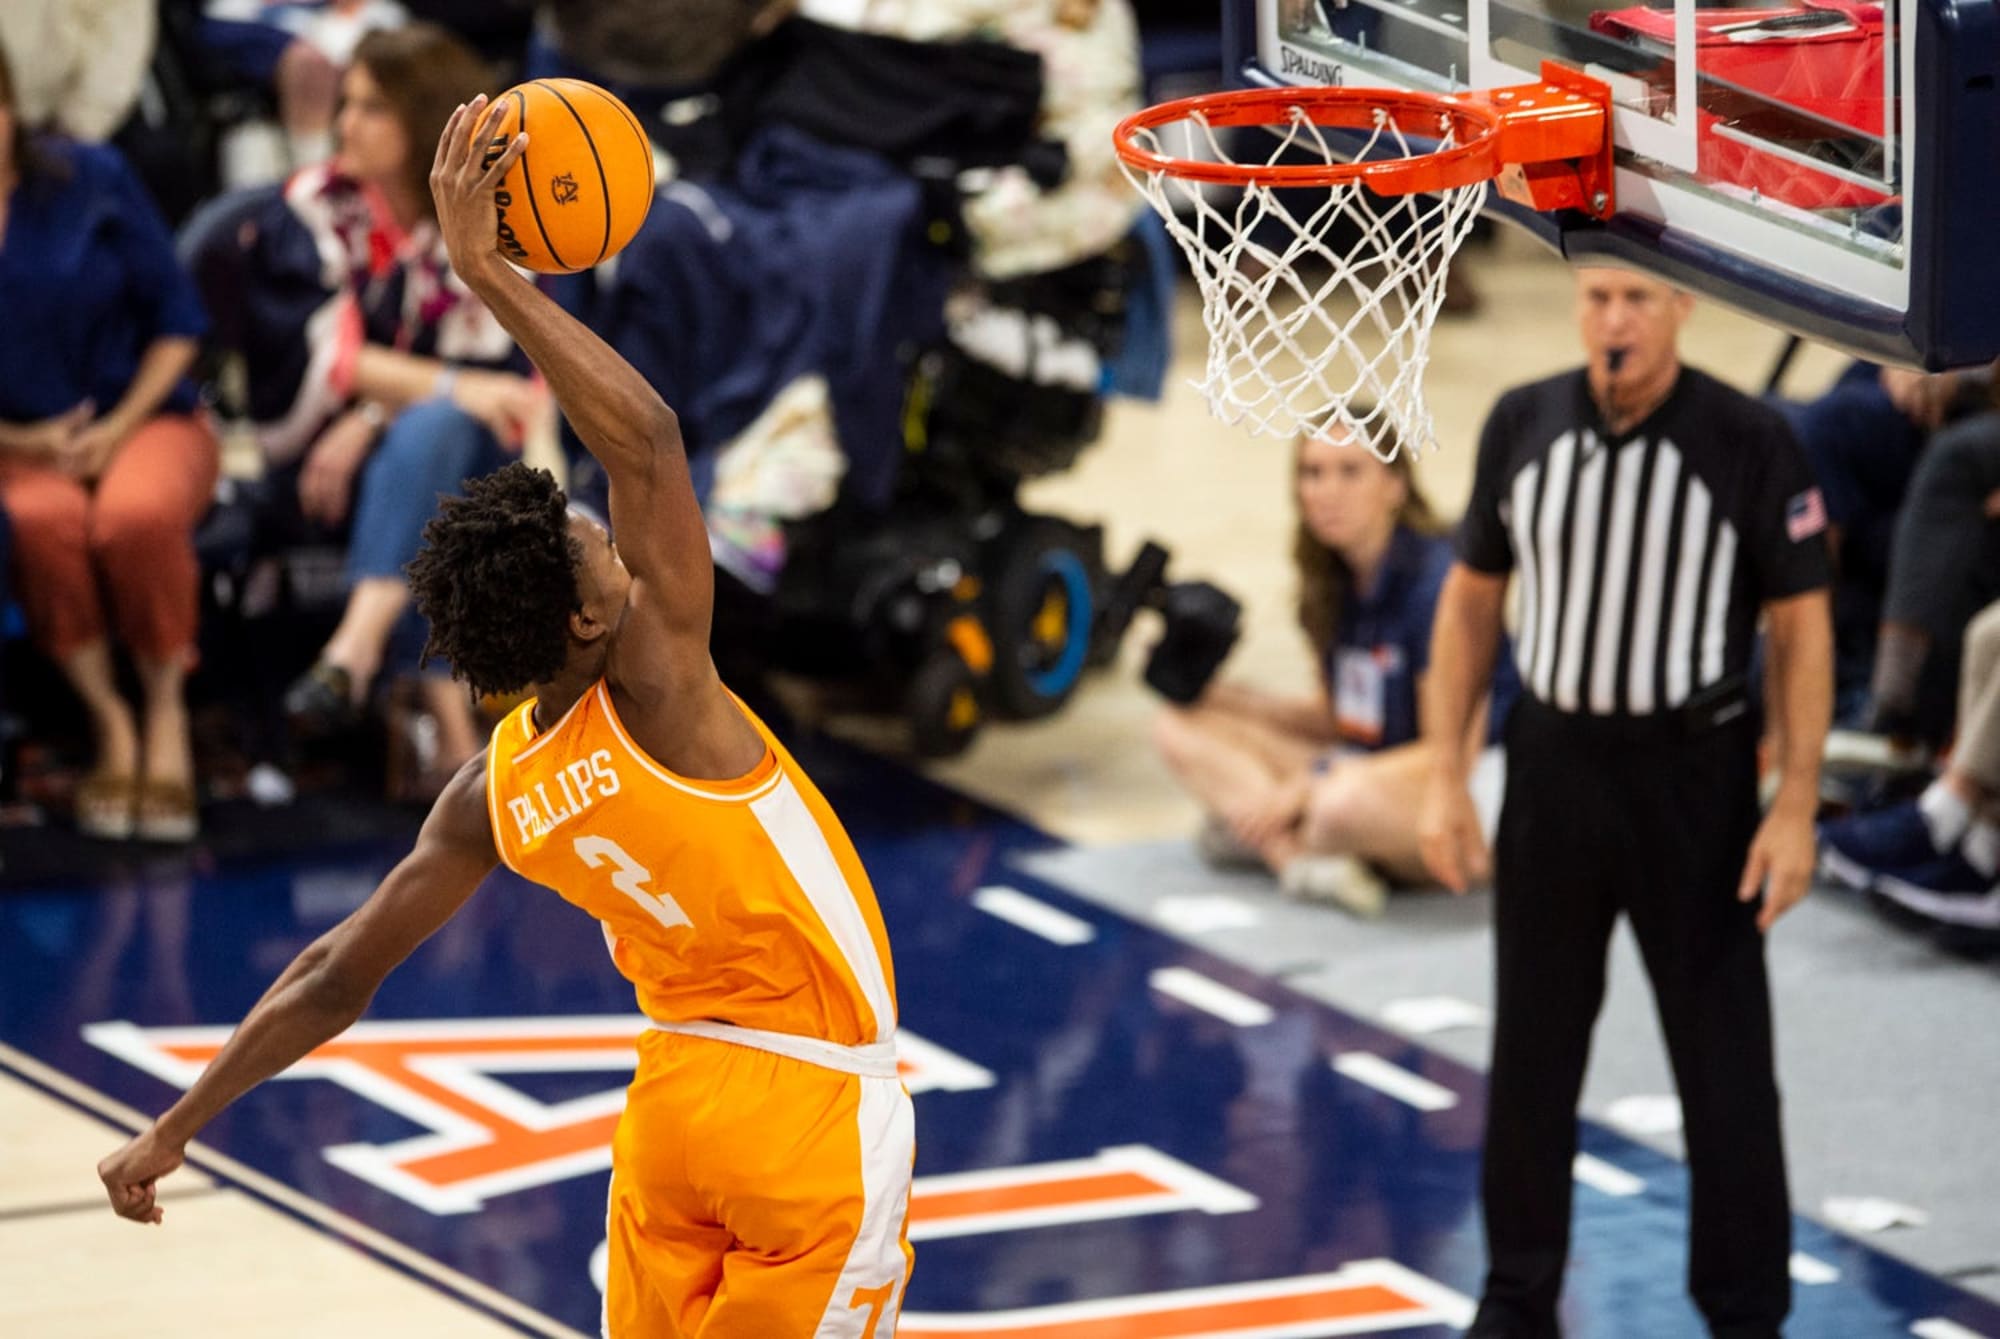 Analyst hints at Auburn basketball landing Tennessee transfer in portal